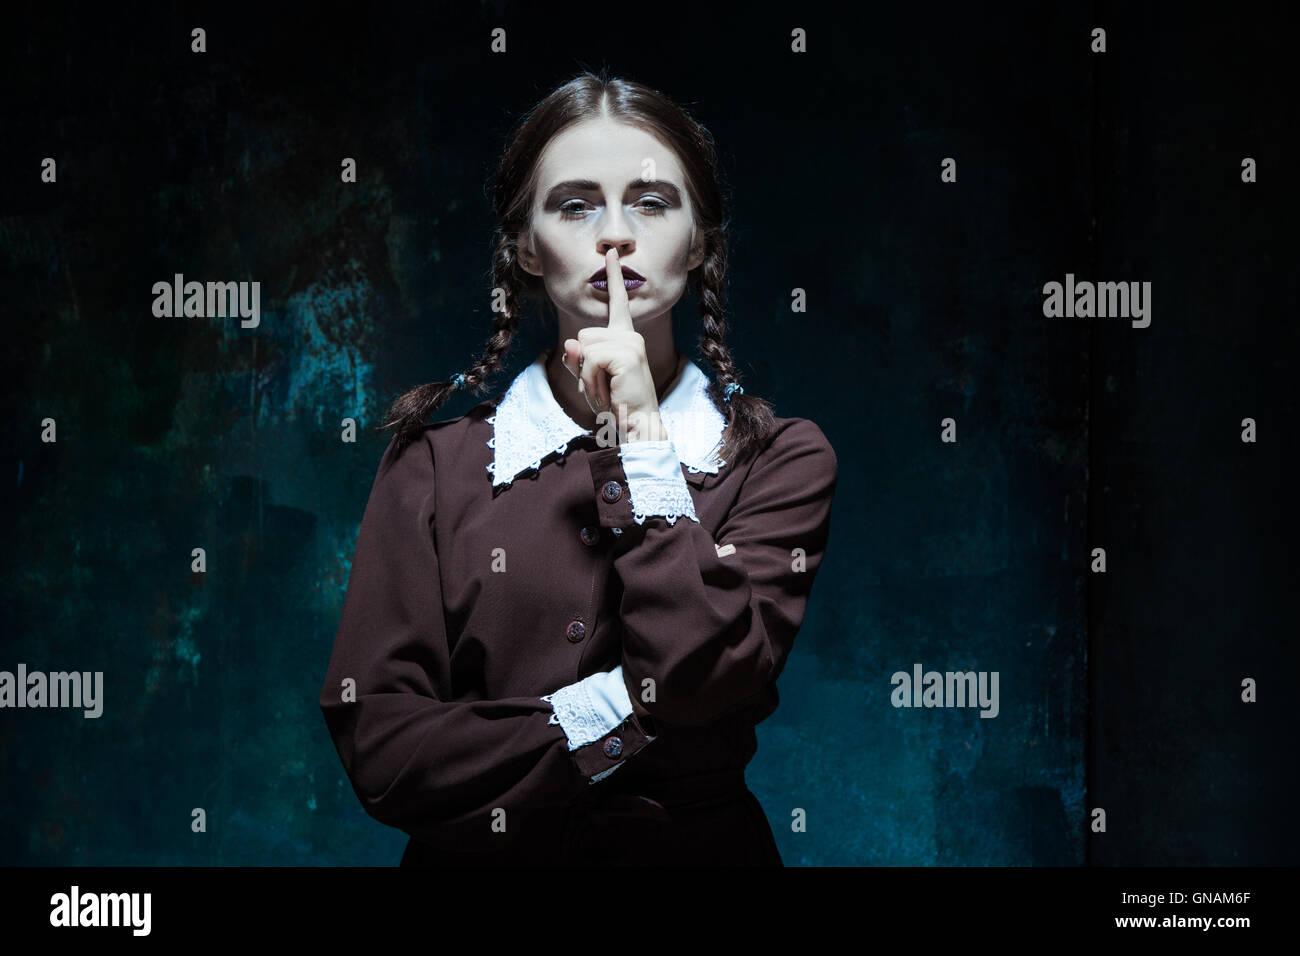 Portrait of a young girl in school uniform as killer woman Stock Photo